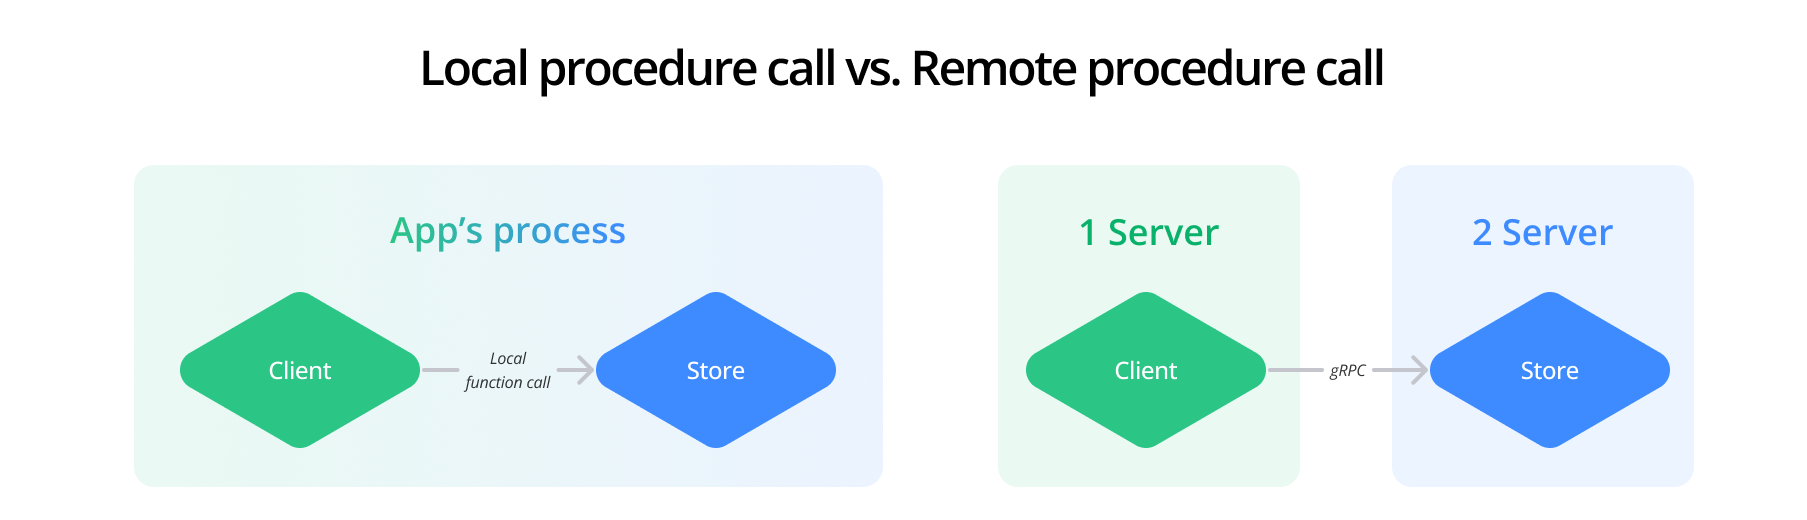 Difference between Local procedure call & Remote procedure call